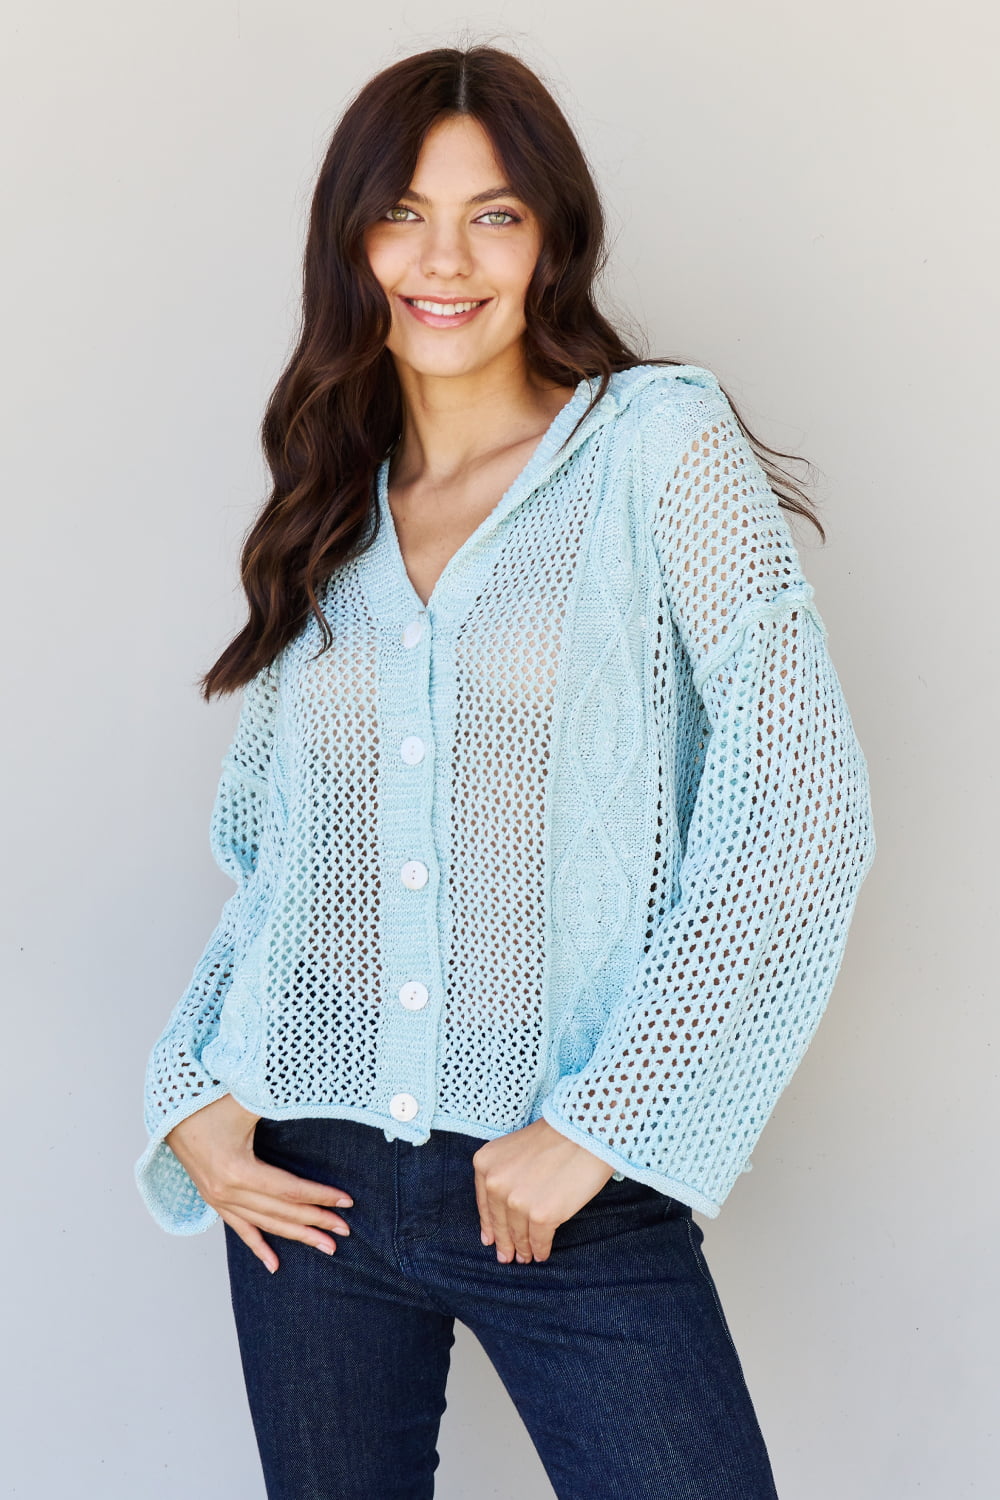 Pleasant Dreams Hooded Sweater Cardigan - Light Blue / S - Sweaters - Shirts & Tops - 1 - 2024